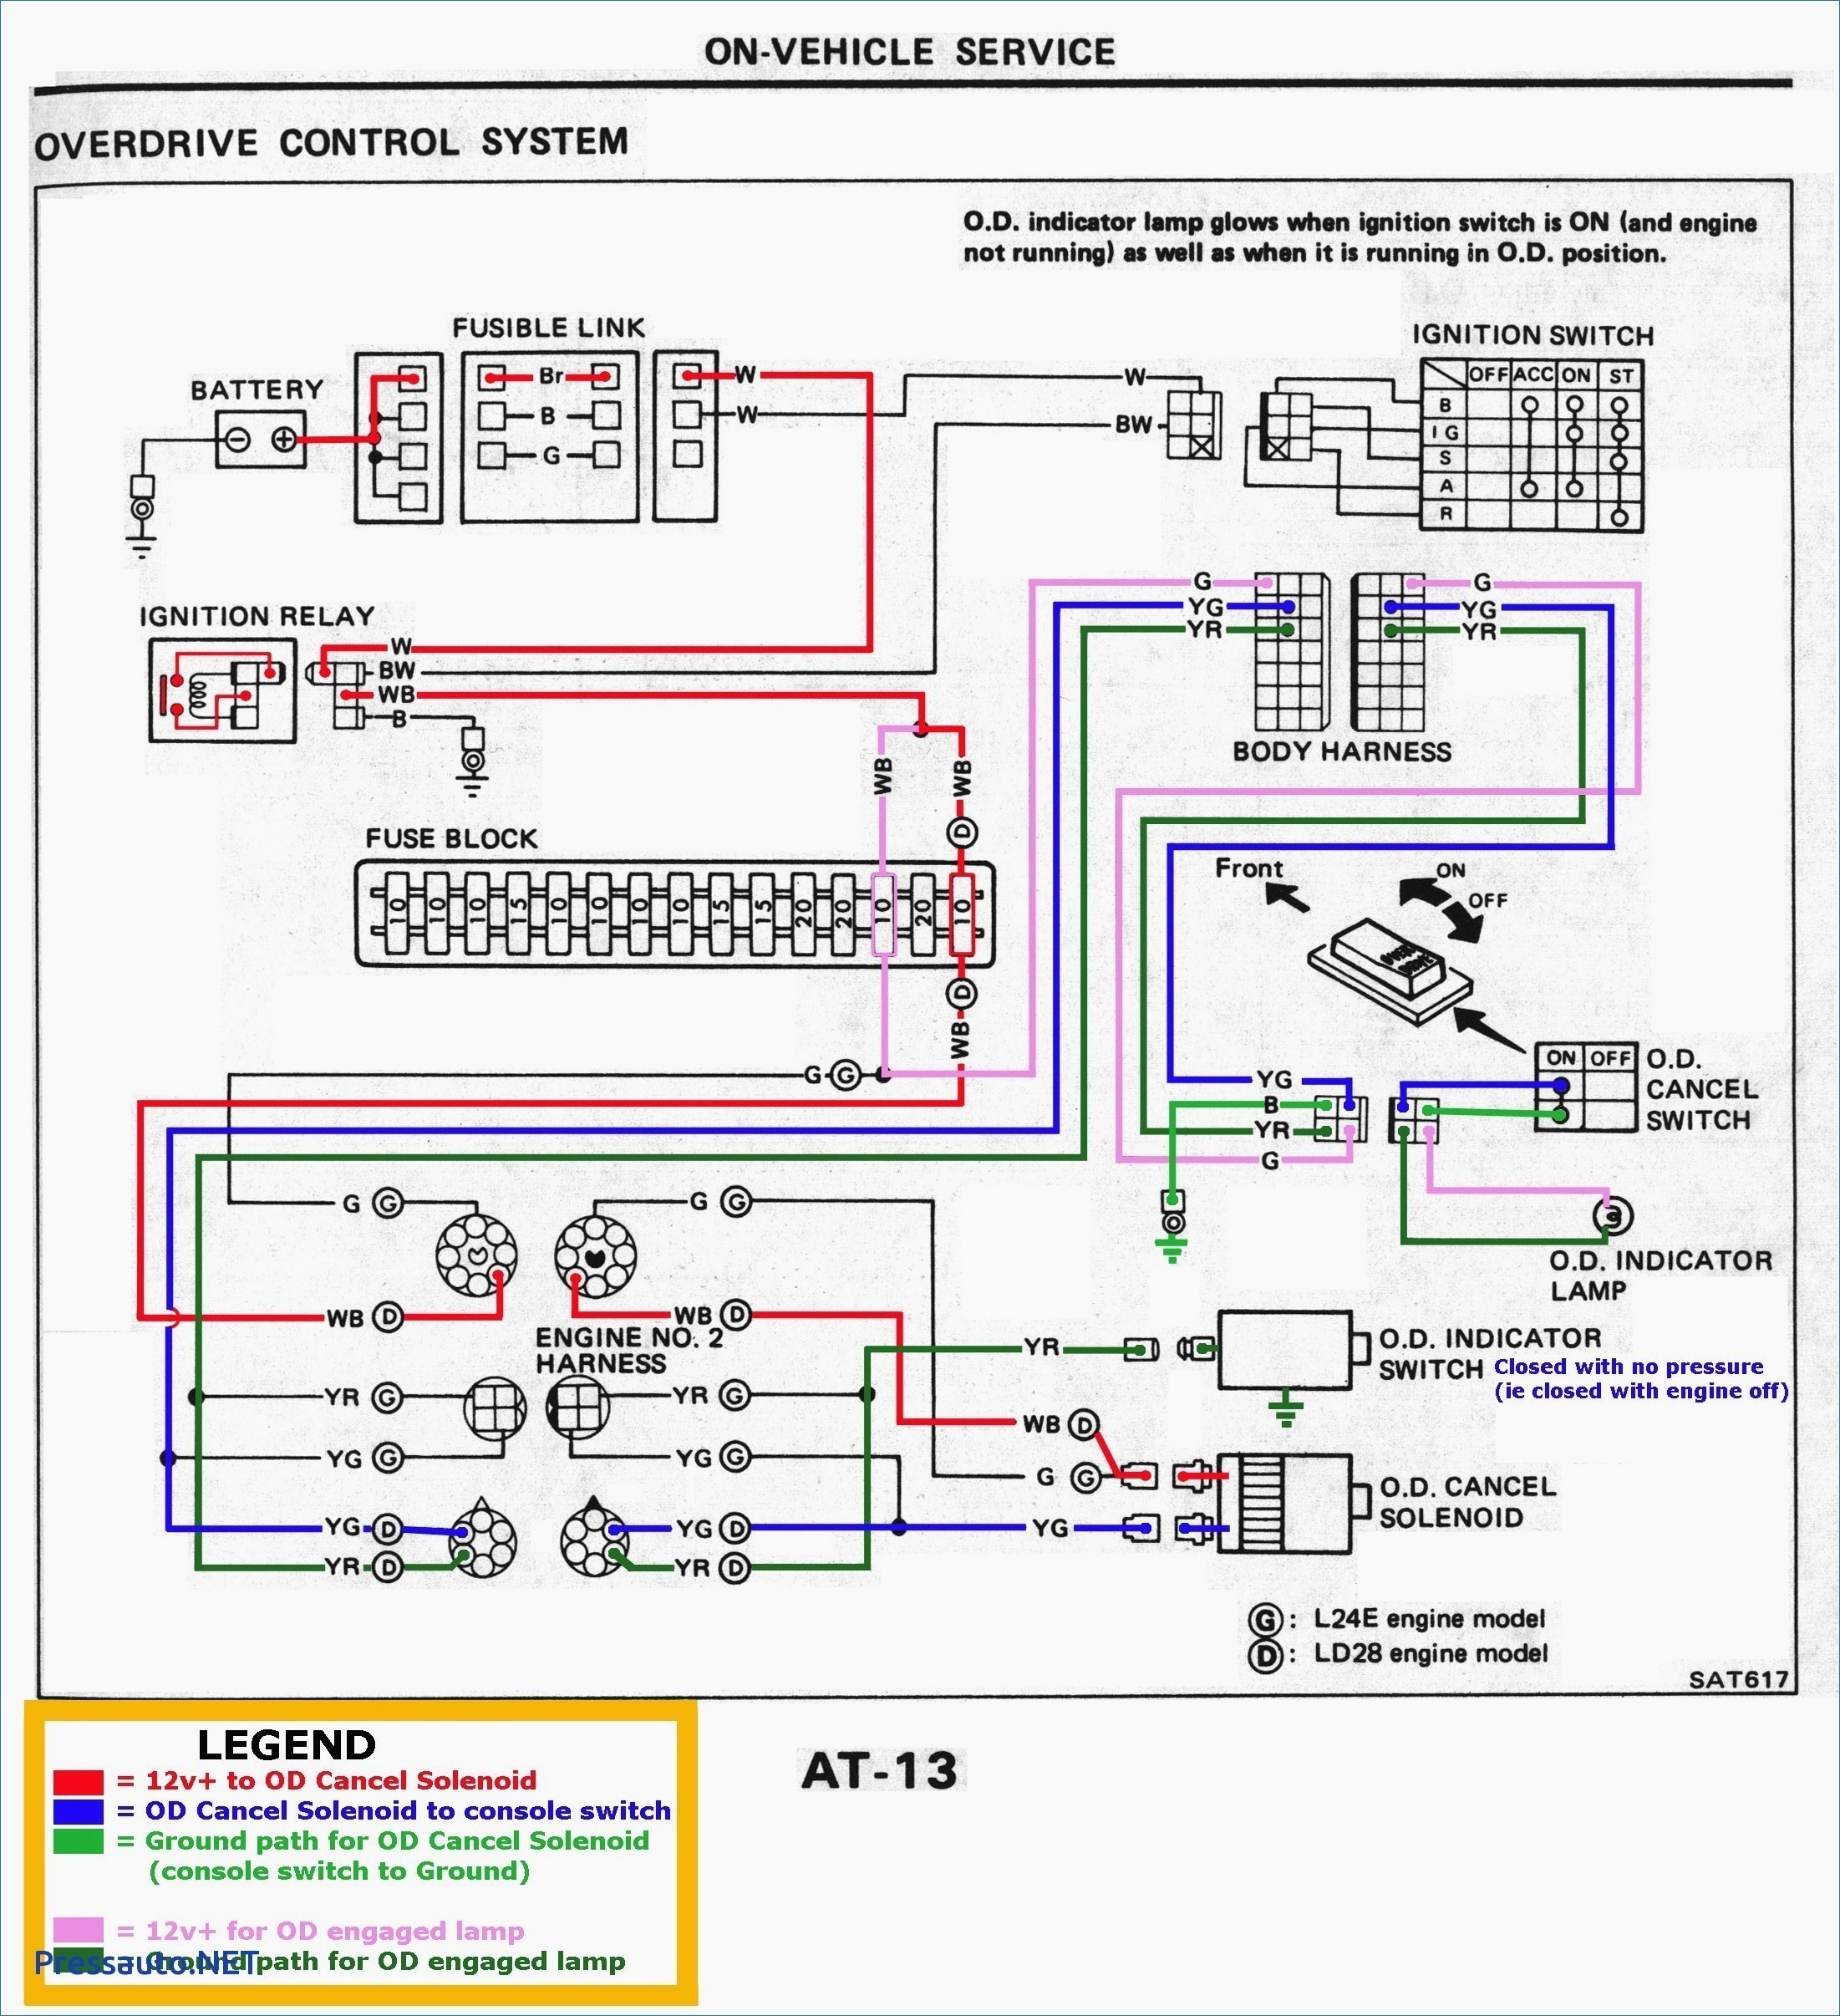 for universal sel ignition wiring diagrams enthusiast wiring rh rasalibre co Point and Condenser Ignition System Diagram Ignition Coil Diagram